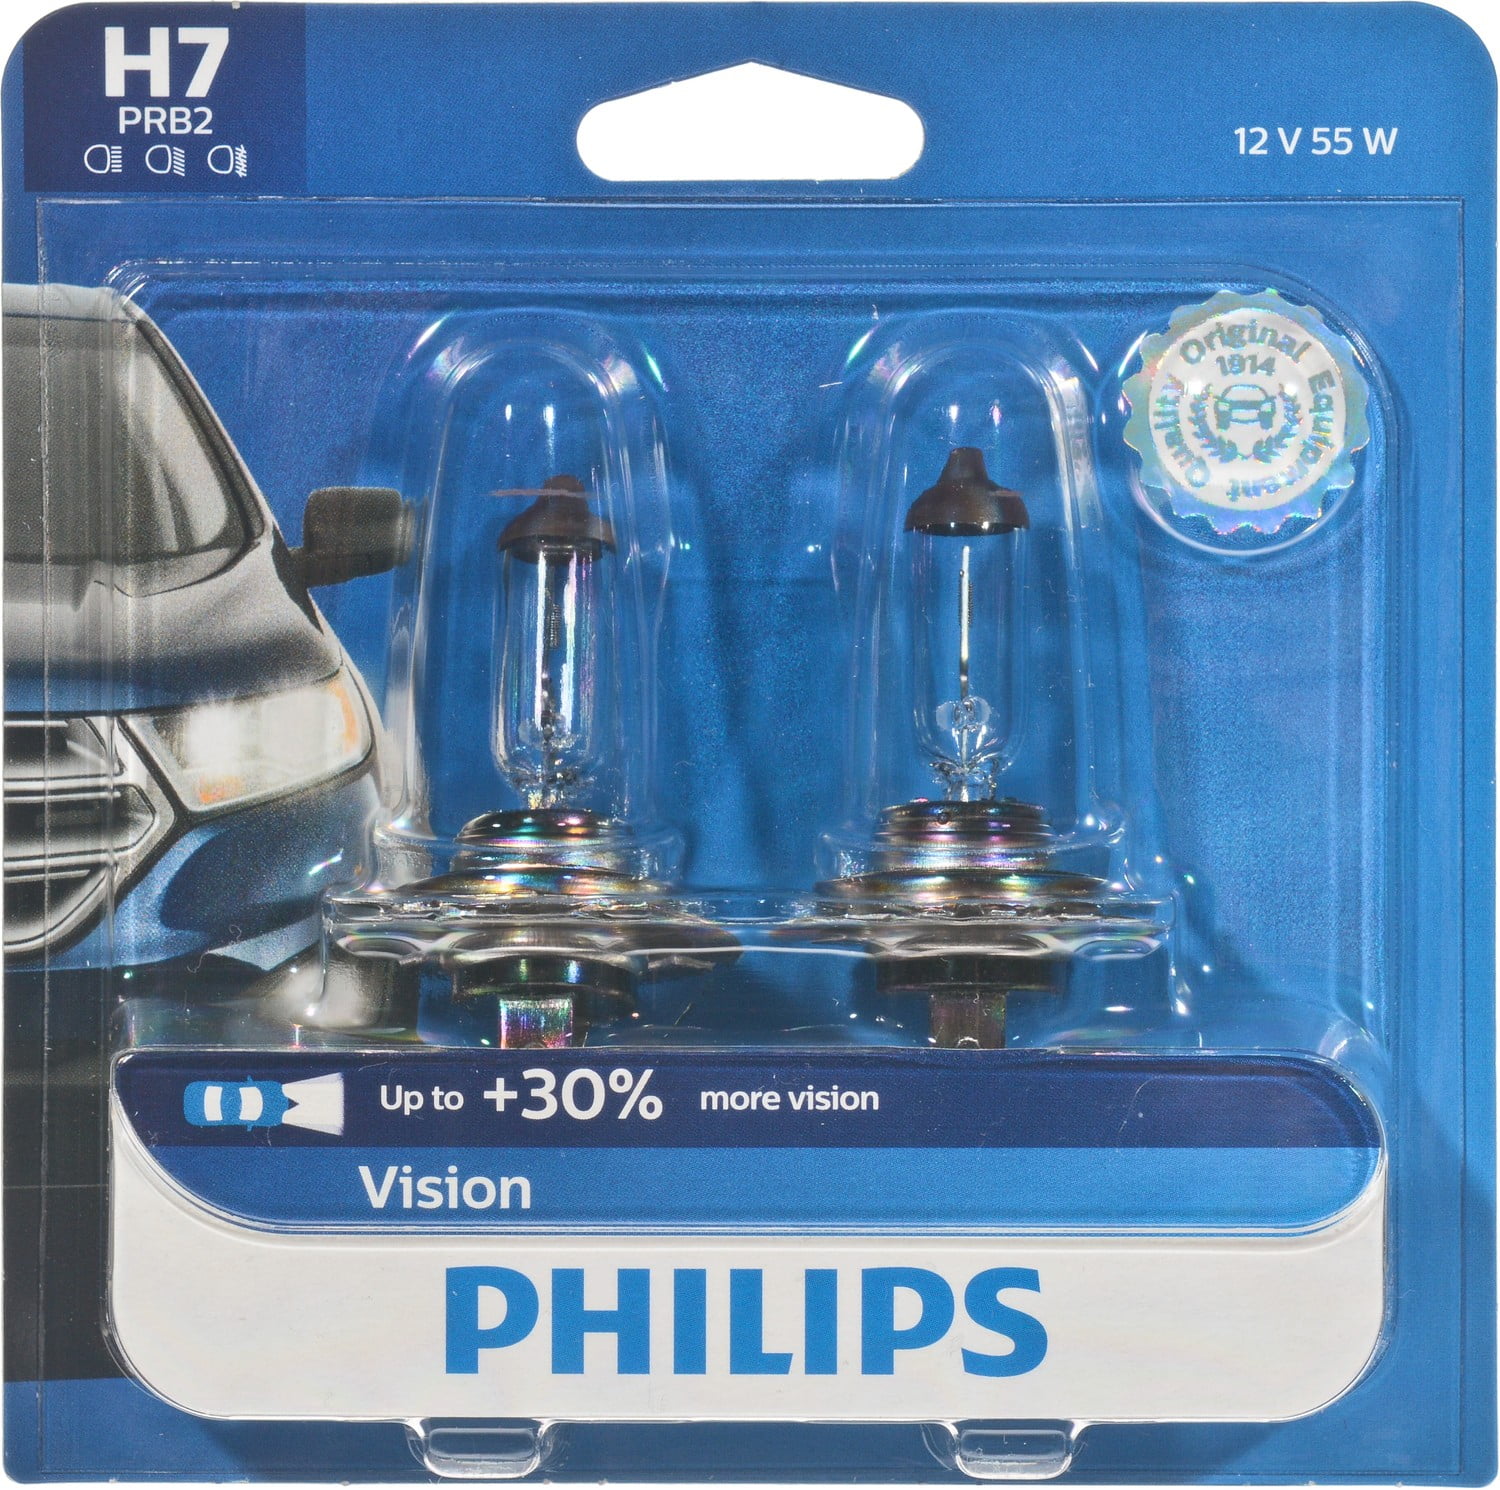 Philips H7 Vision Headlight, Pack of 2